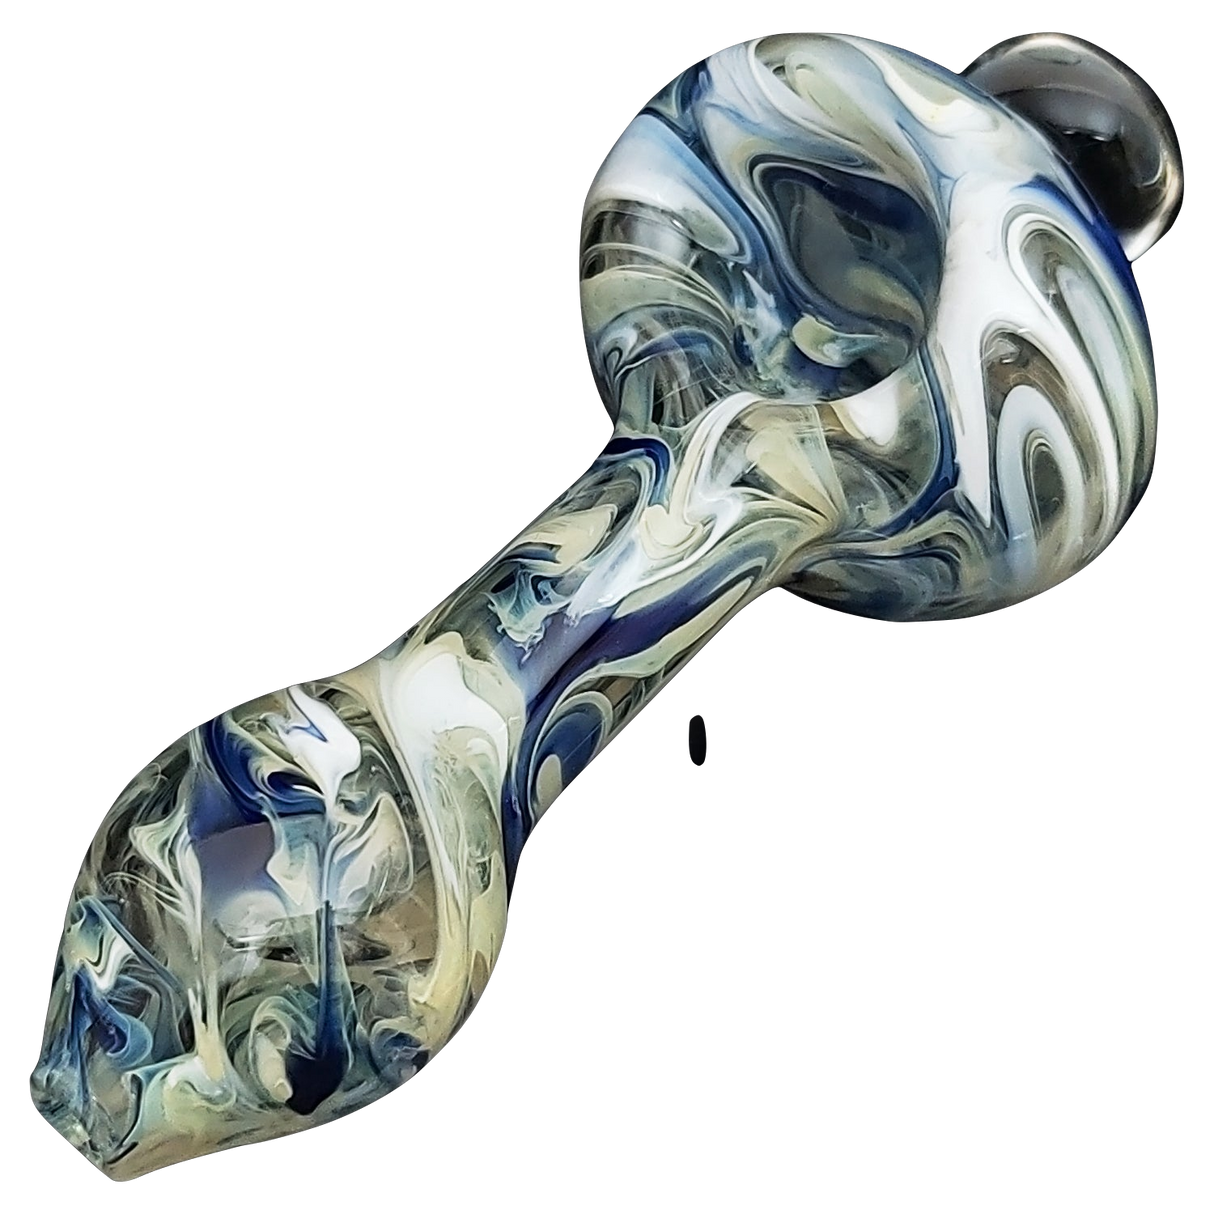 LA Pipes HP2 Spoon hand pipe made of borosilicate glass with swirling blue design, side view